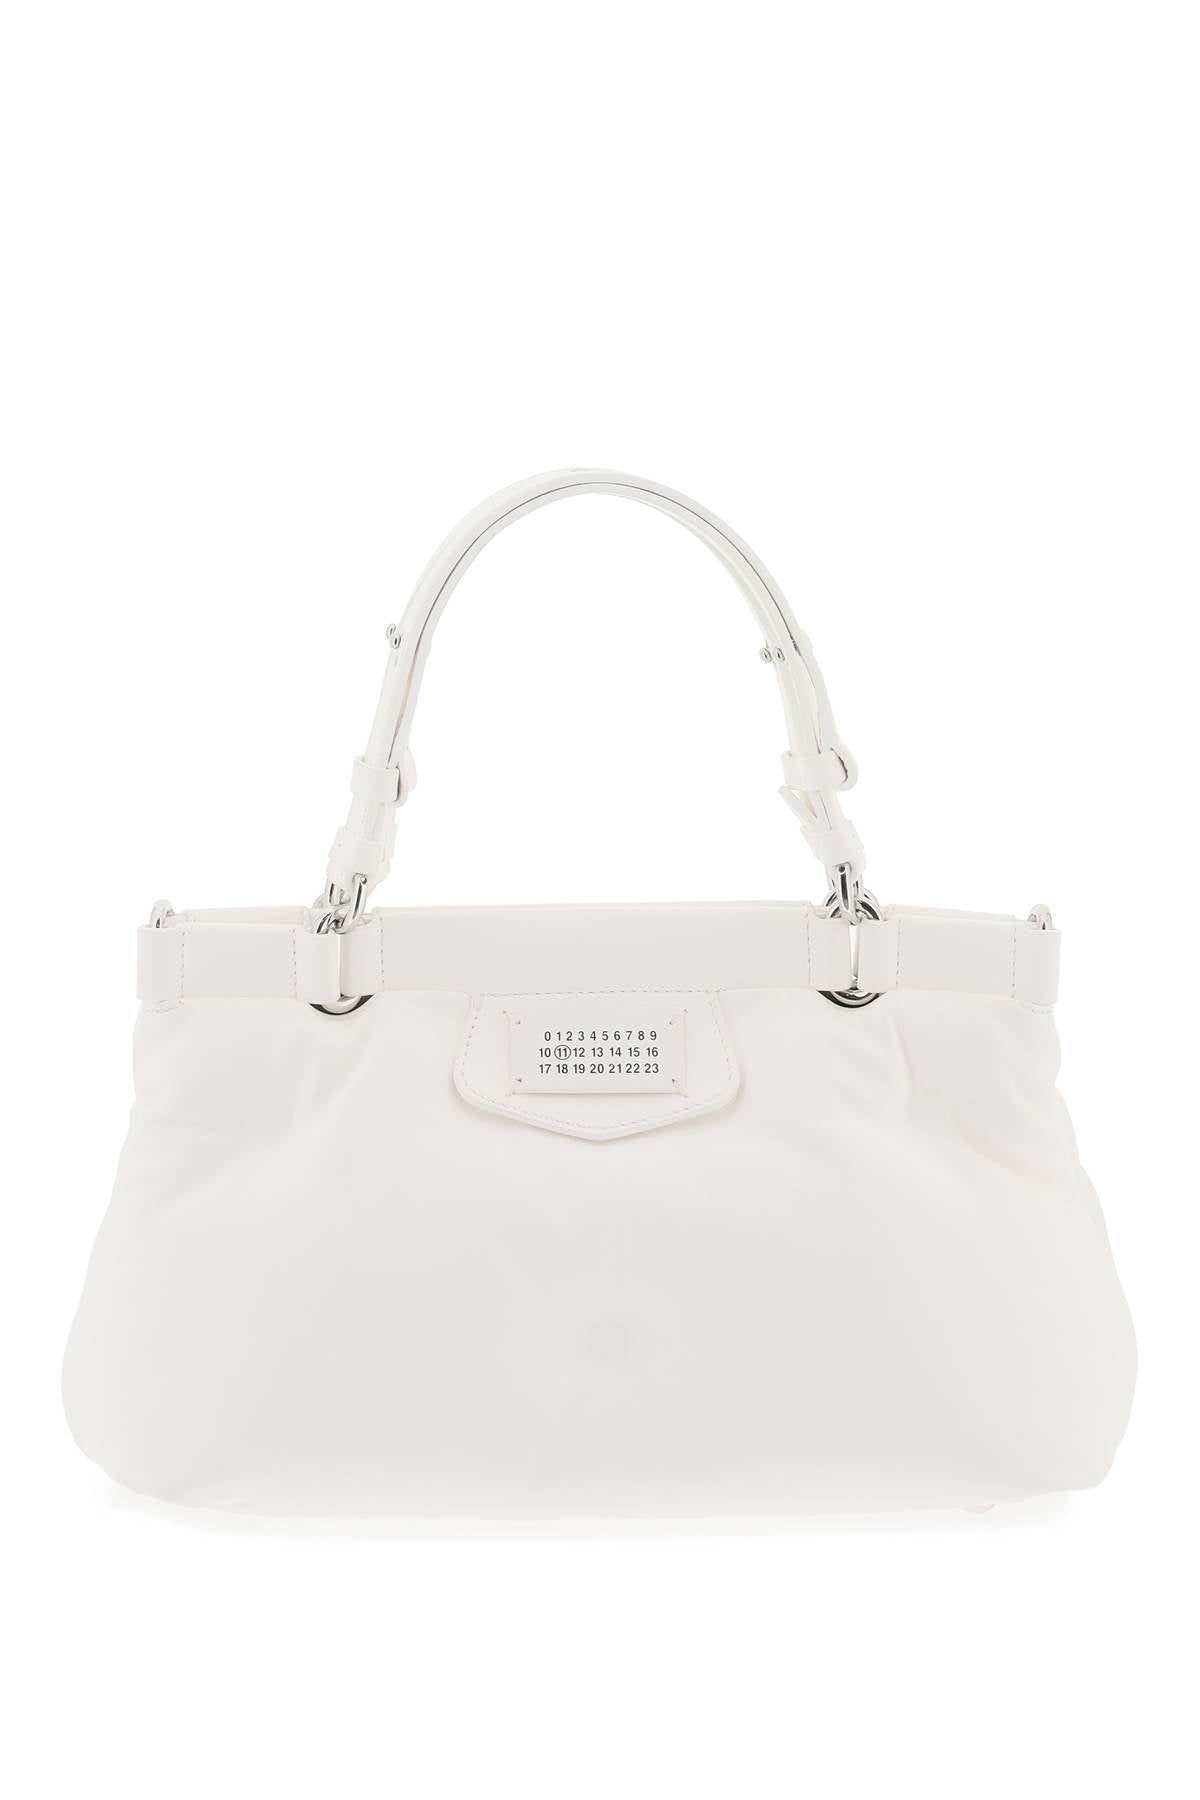 MAISON MARGIELA Small Glam Slam Quilted Leather Unisex Handbag with Silver Accents - White